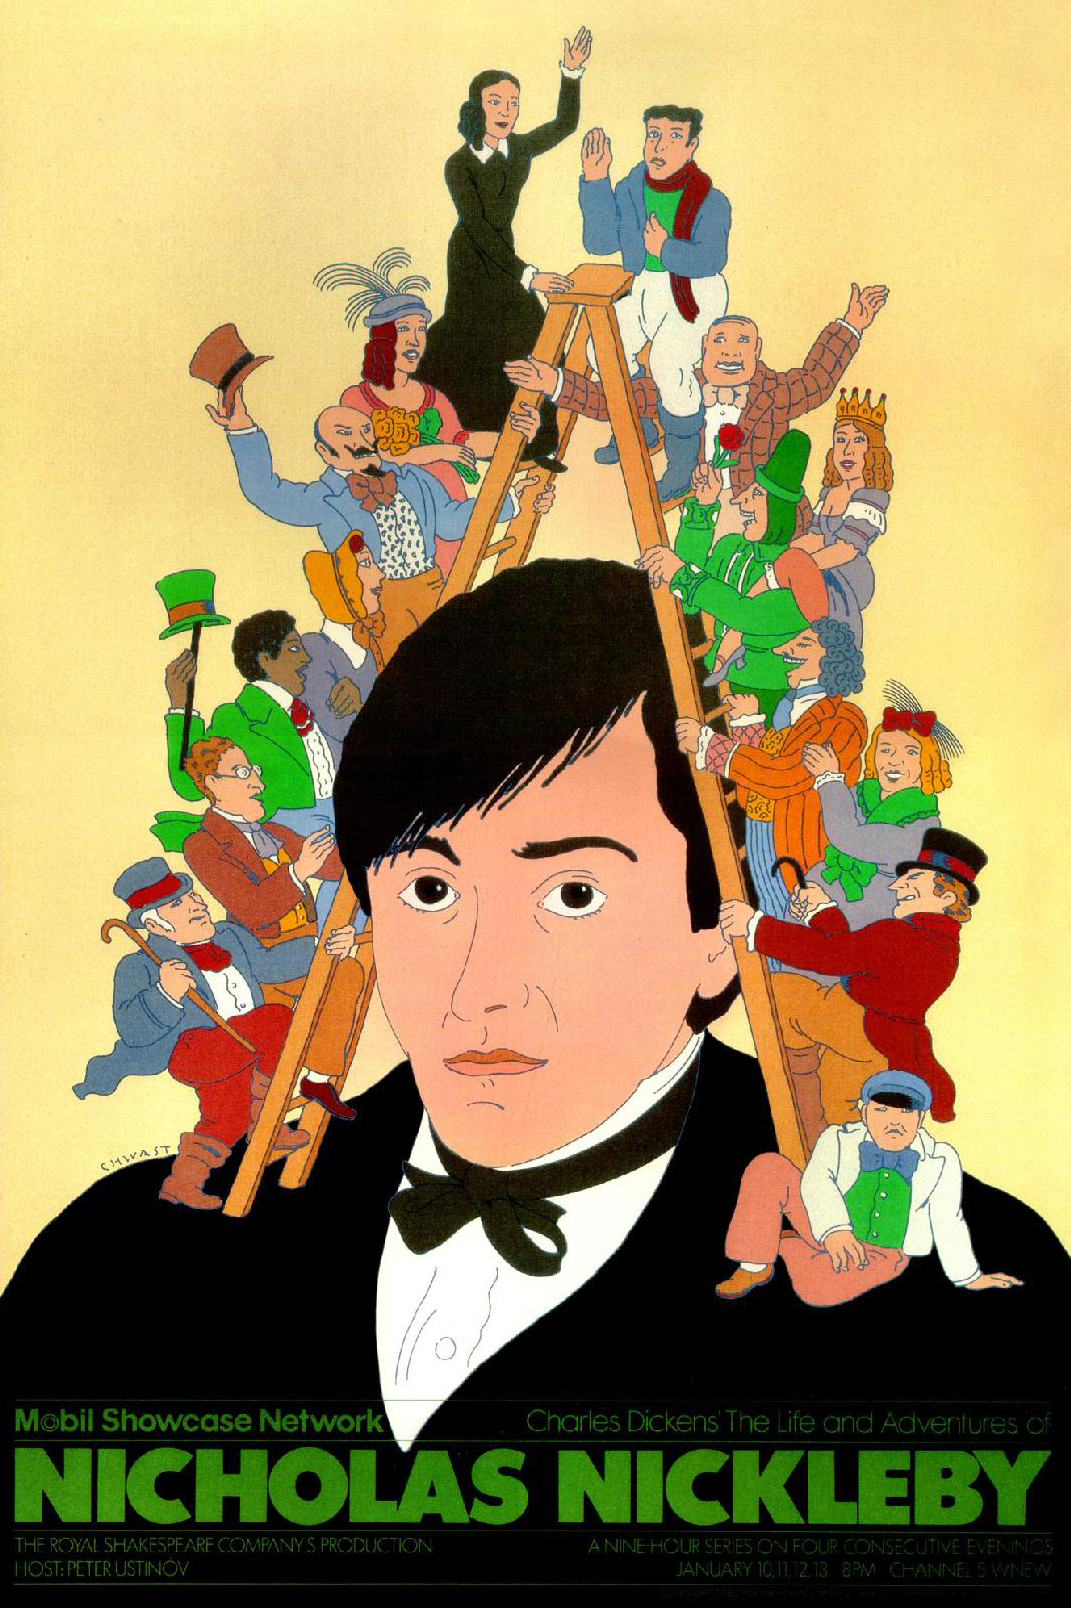 Poster of man in suit surrounded by people on ladder.